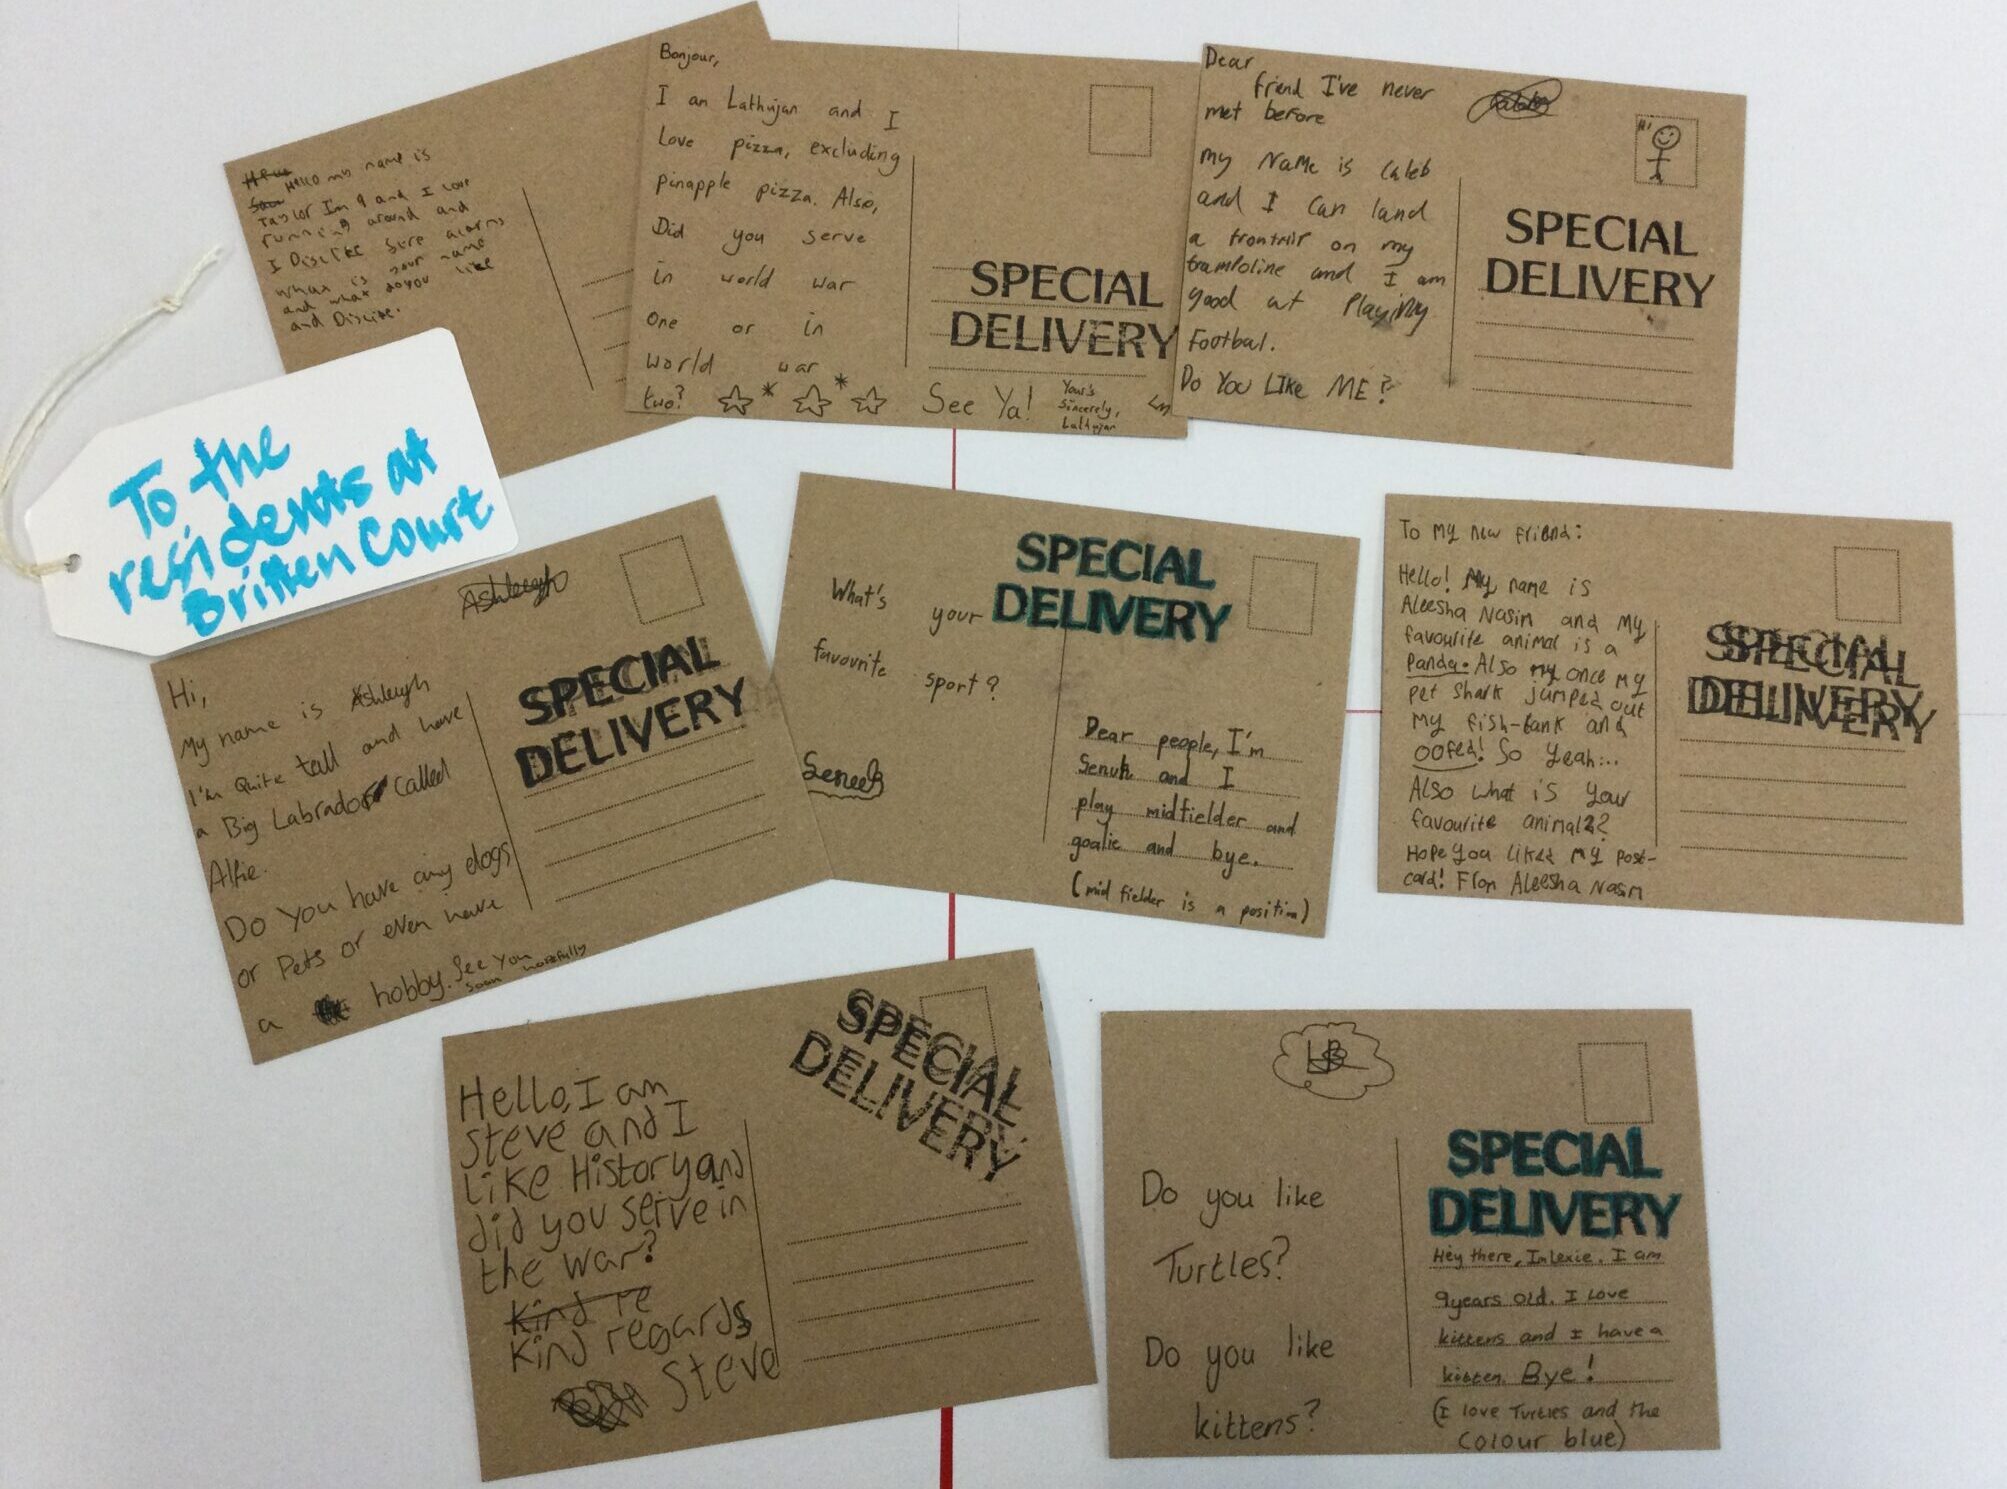 The Special Delivery postcards, written by children at Roman Hill Primary School